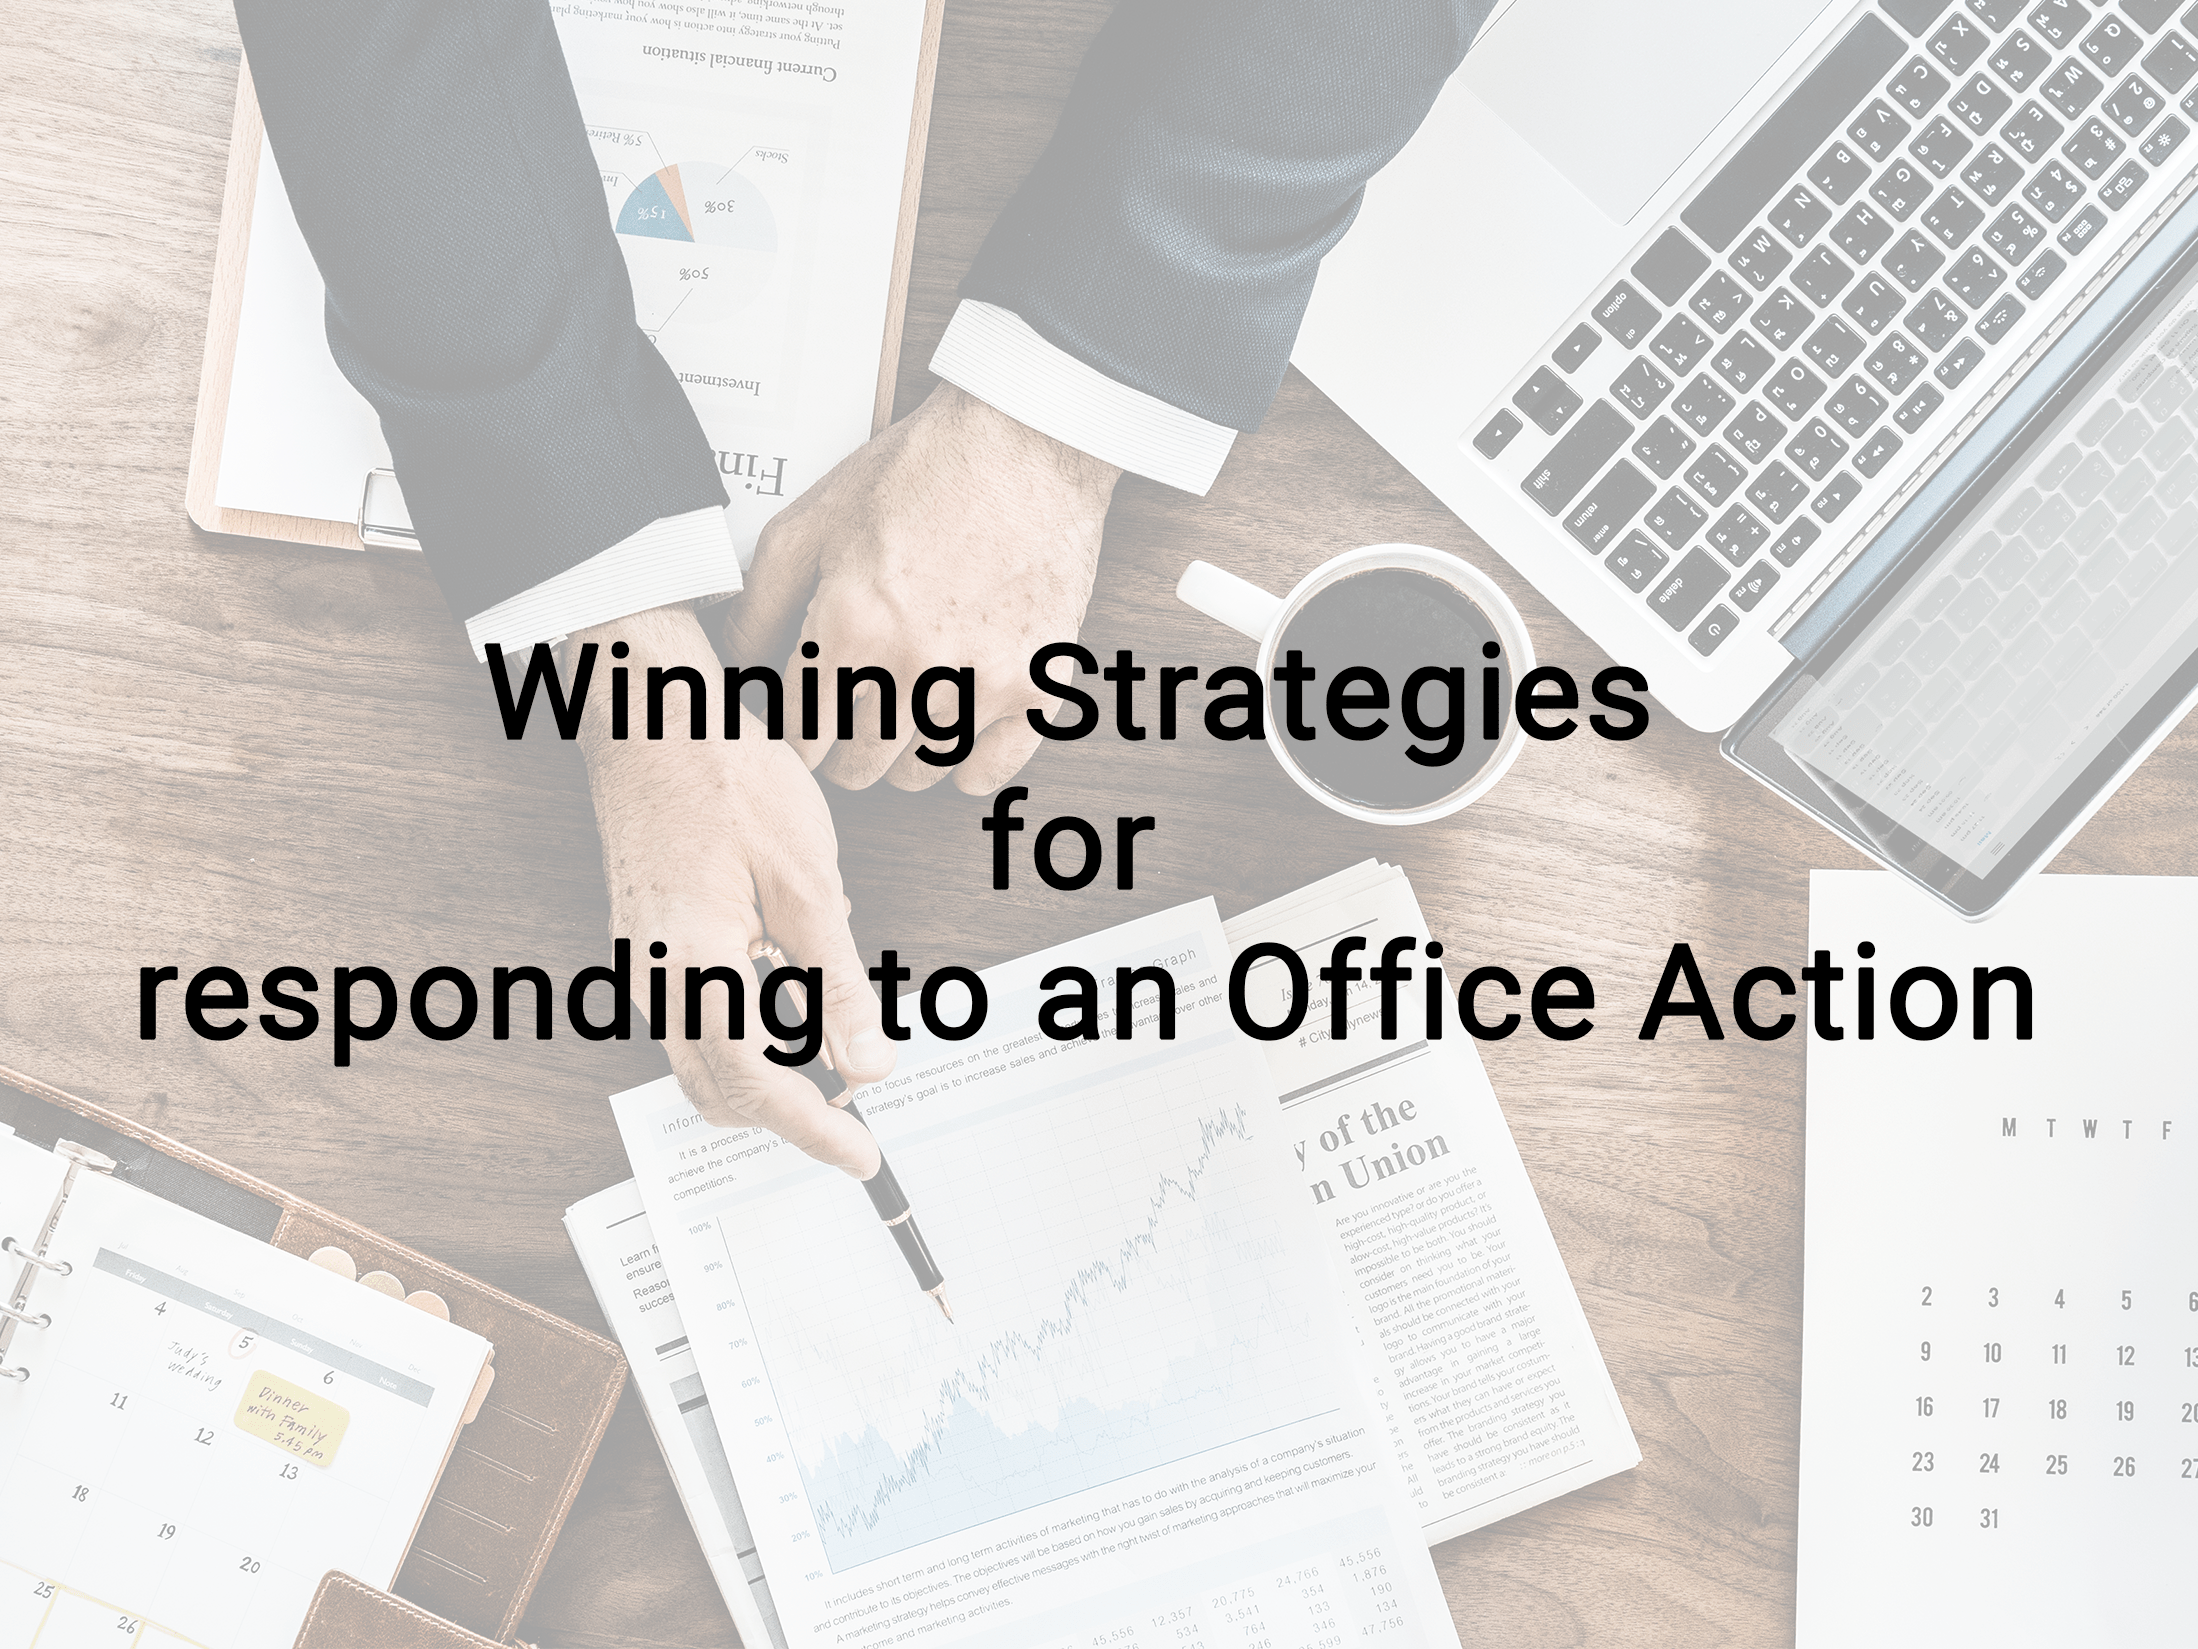 Winning Strategies For Responding to an Office Action